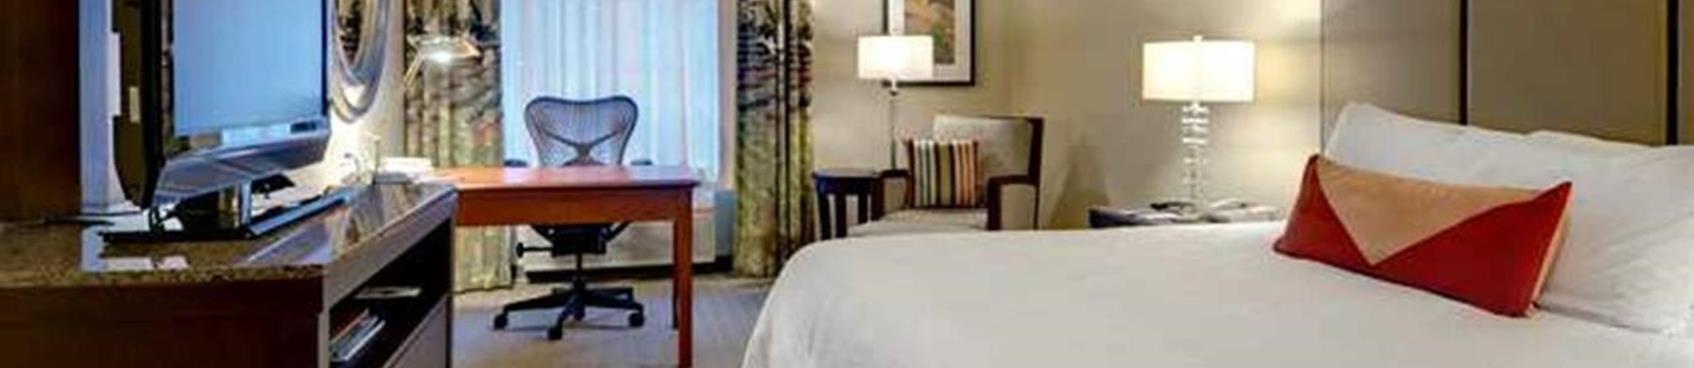 Book A Stay At Hilton Garden Inn Napa On Cellarpass Best Hotel Rates